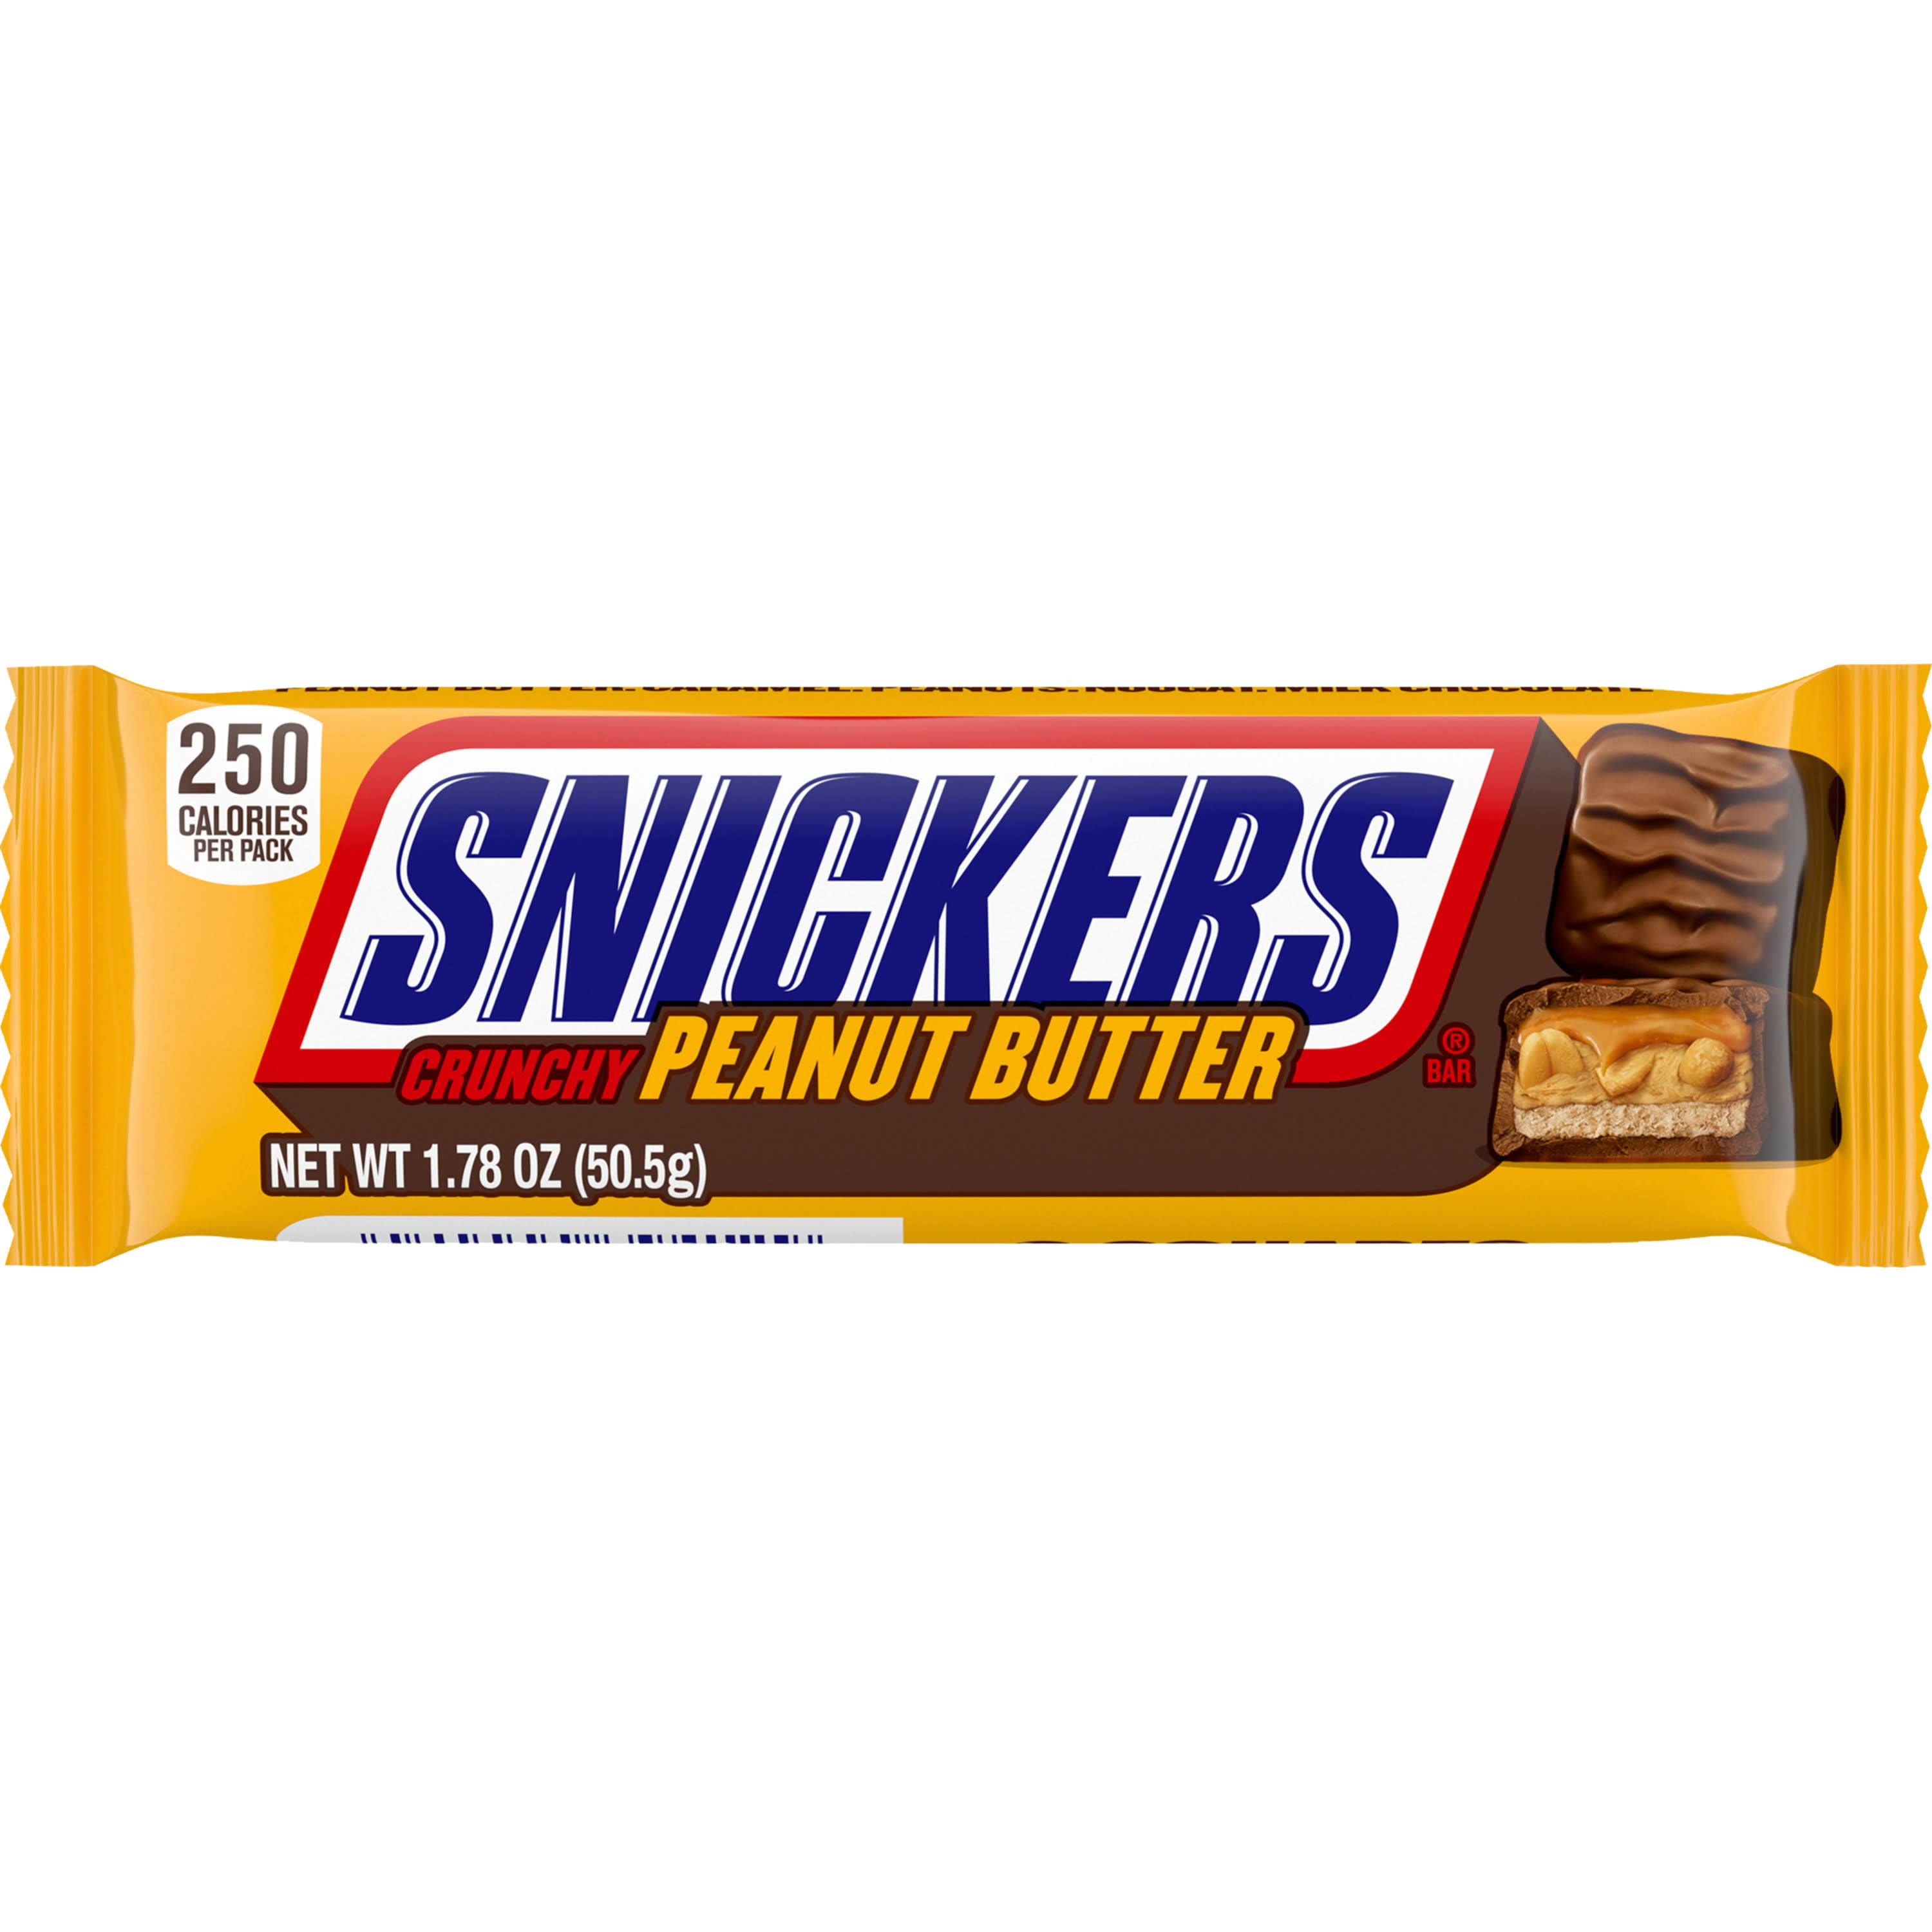 Snickers Squared Candy Bar, Peanut Butter - 2 squares, 1.78 oz